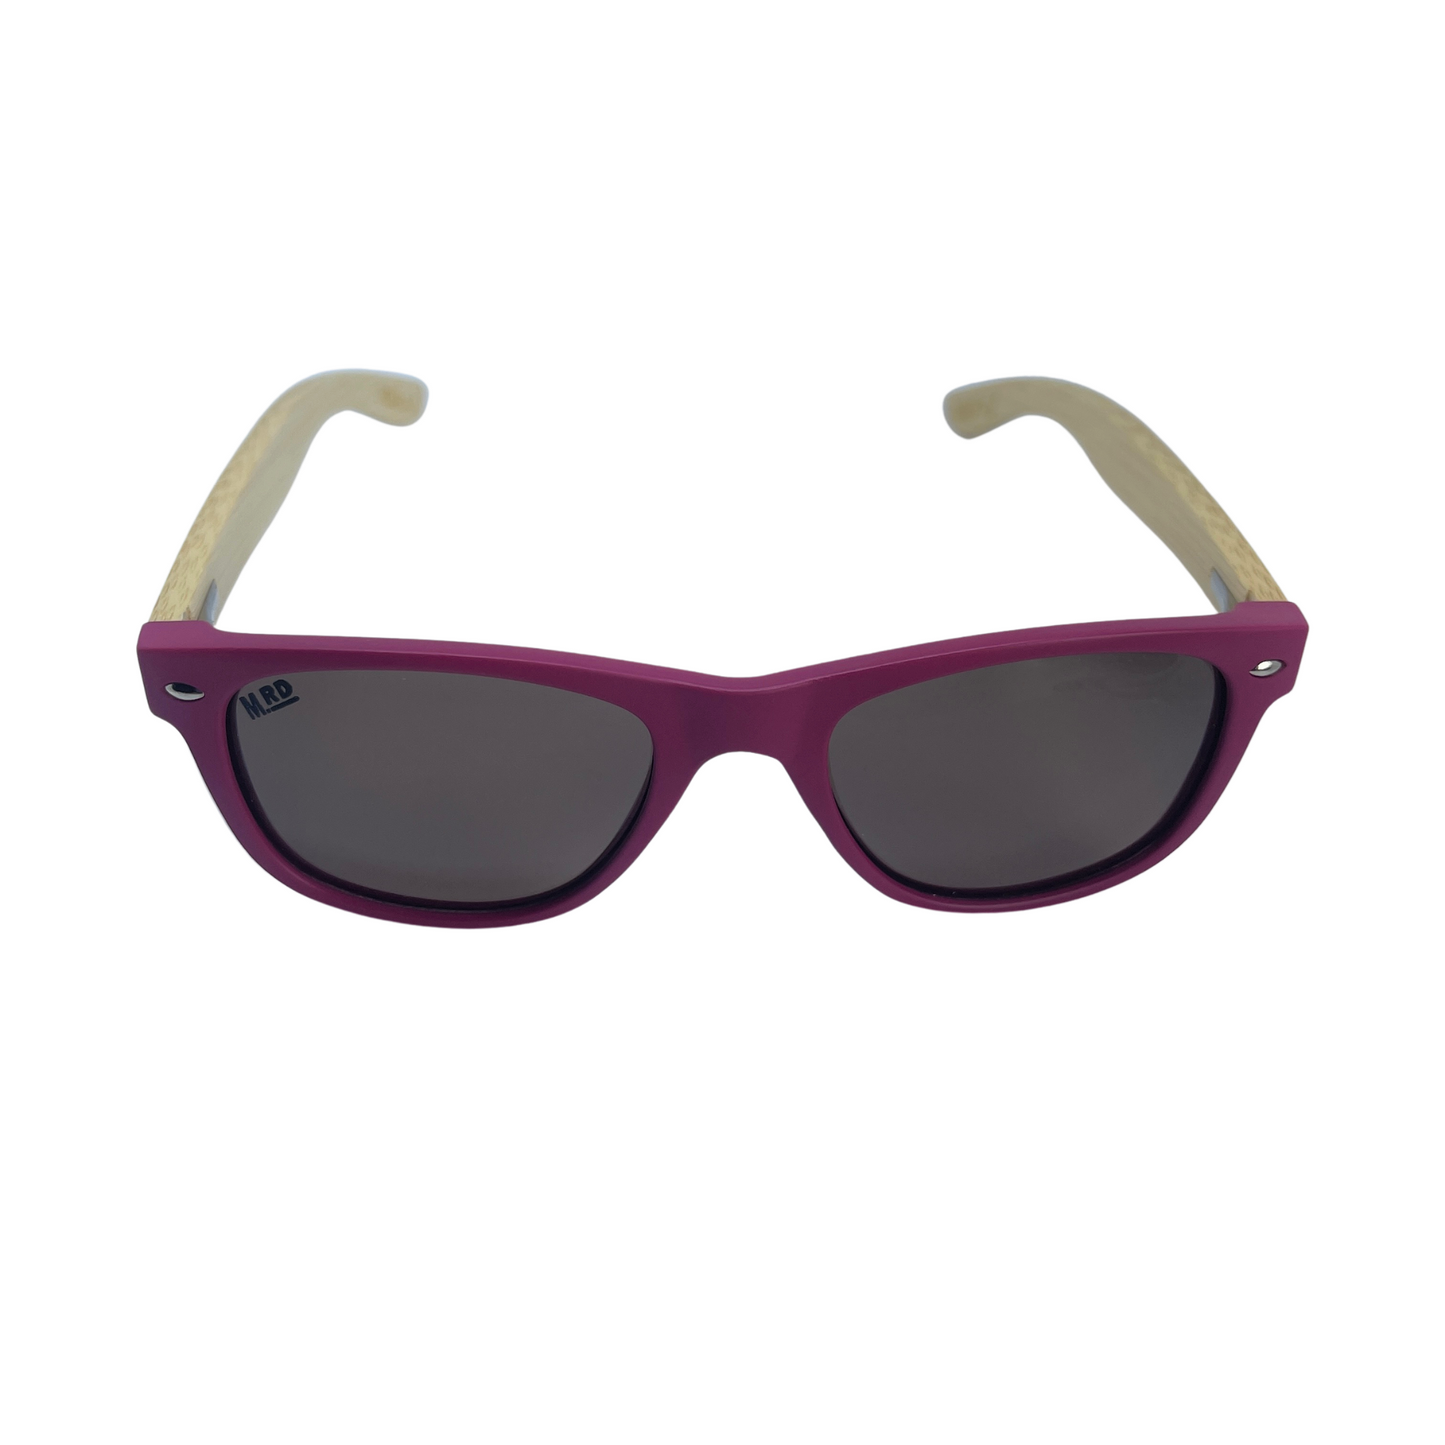 Kids sunglasses with pink frame and wooden arms.